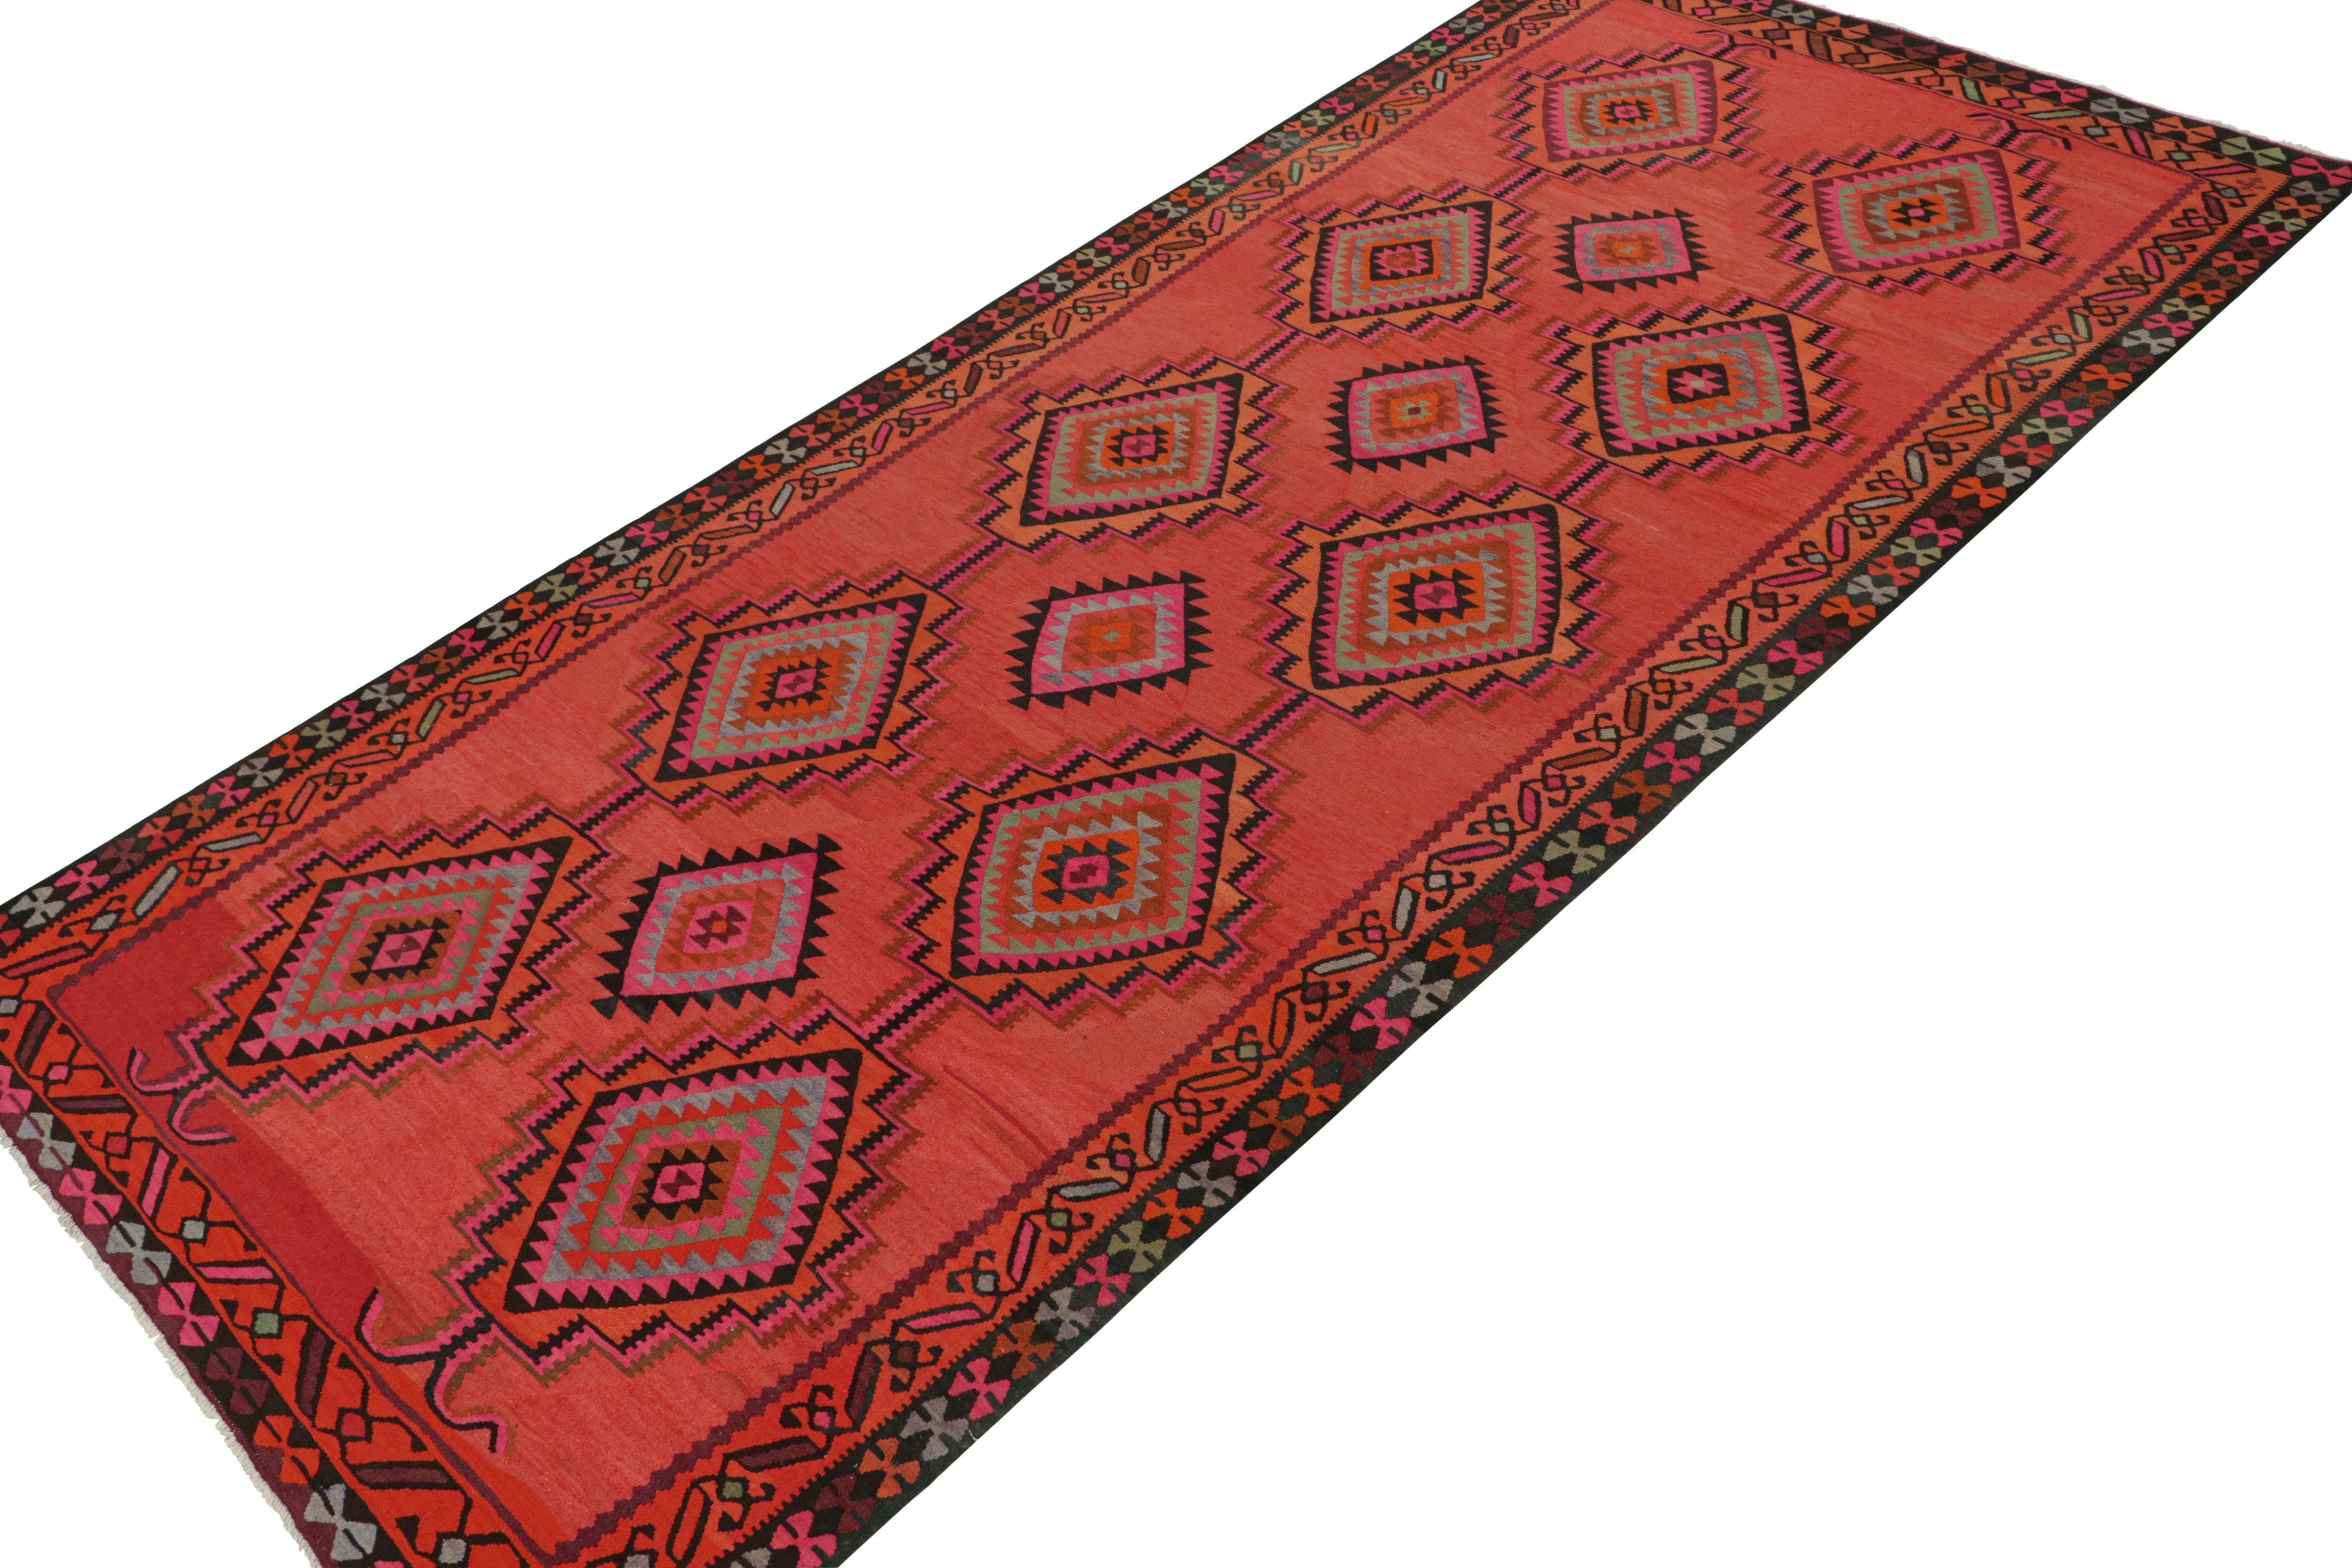 Tribal Vintage Persian Kilim in Red & Black with Diamond Patterns by Rug & Kilim For Sale